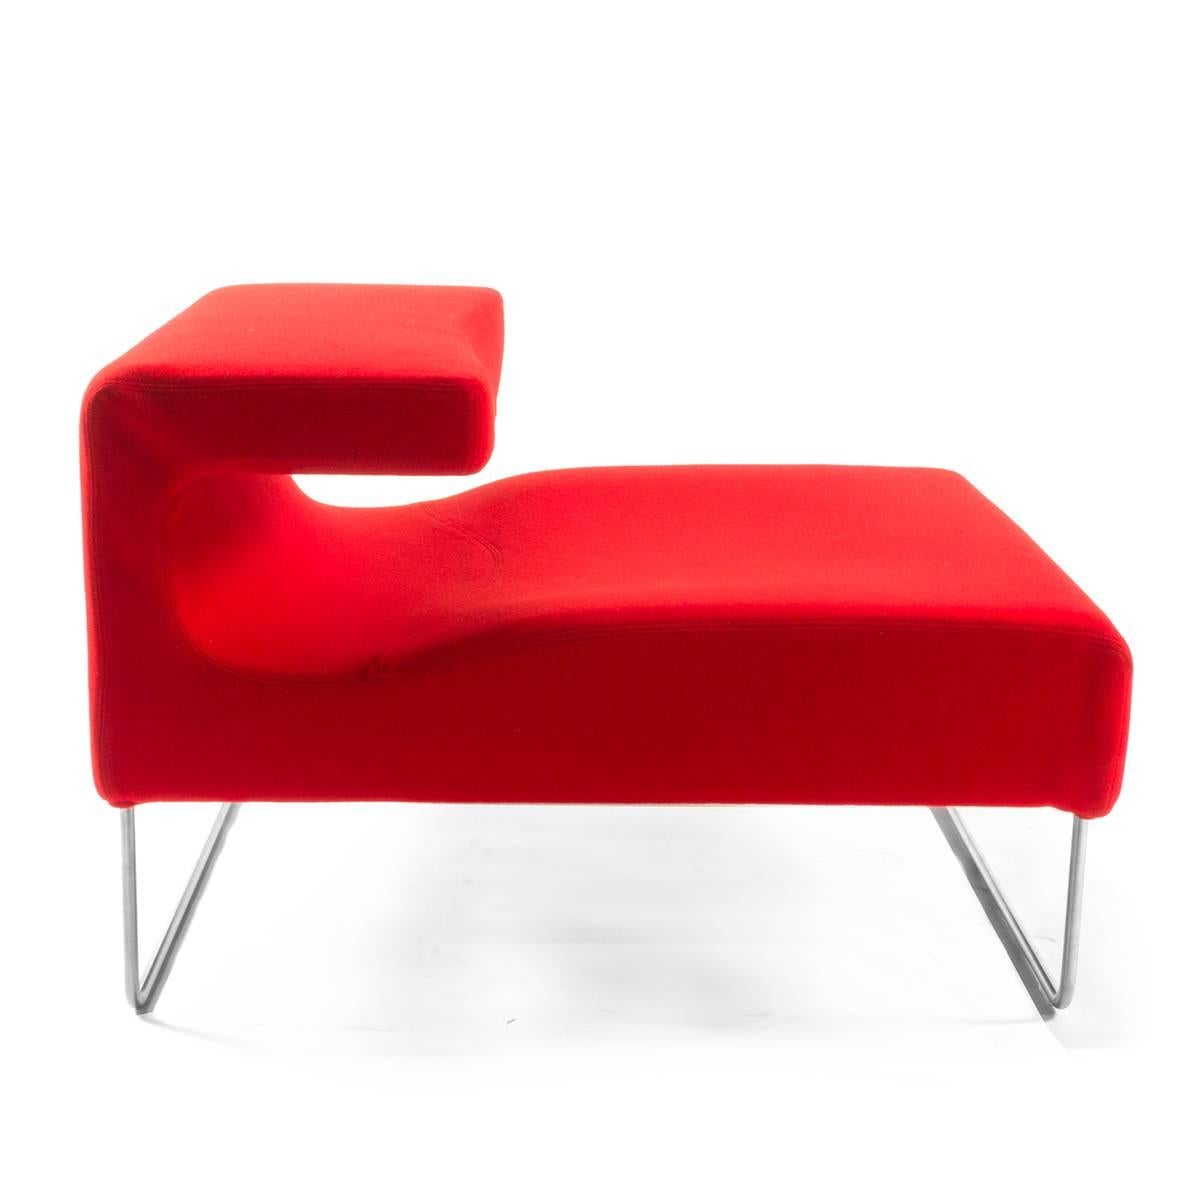 A chair, a chaise longue and a corner element form an extremely versatile modular seating system. Free standing, independent, seats which have also been conceived to be used a single piece. Each element, used in combination with others, gives rise